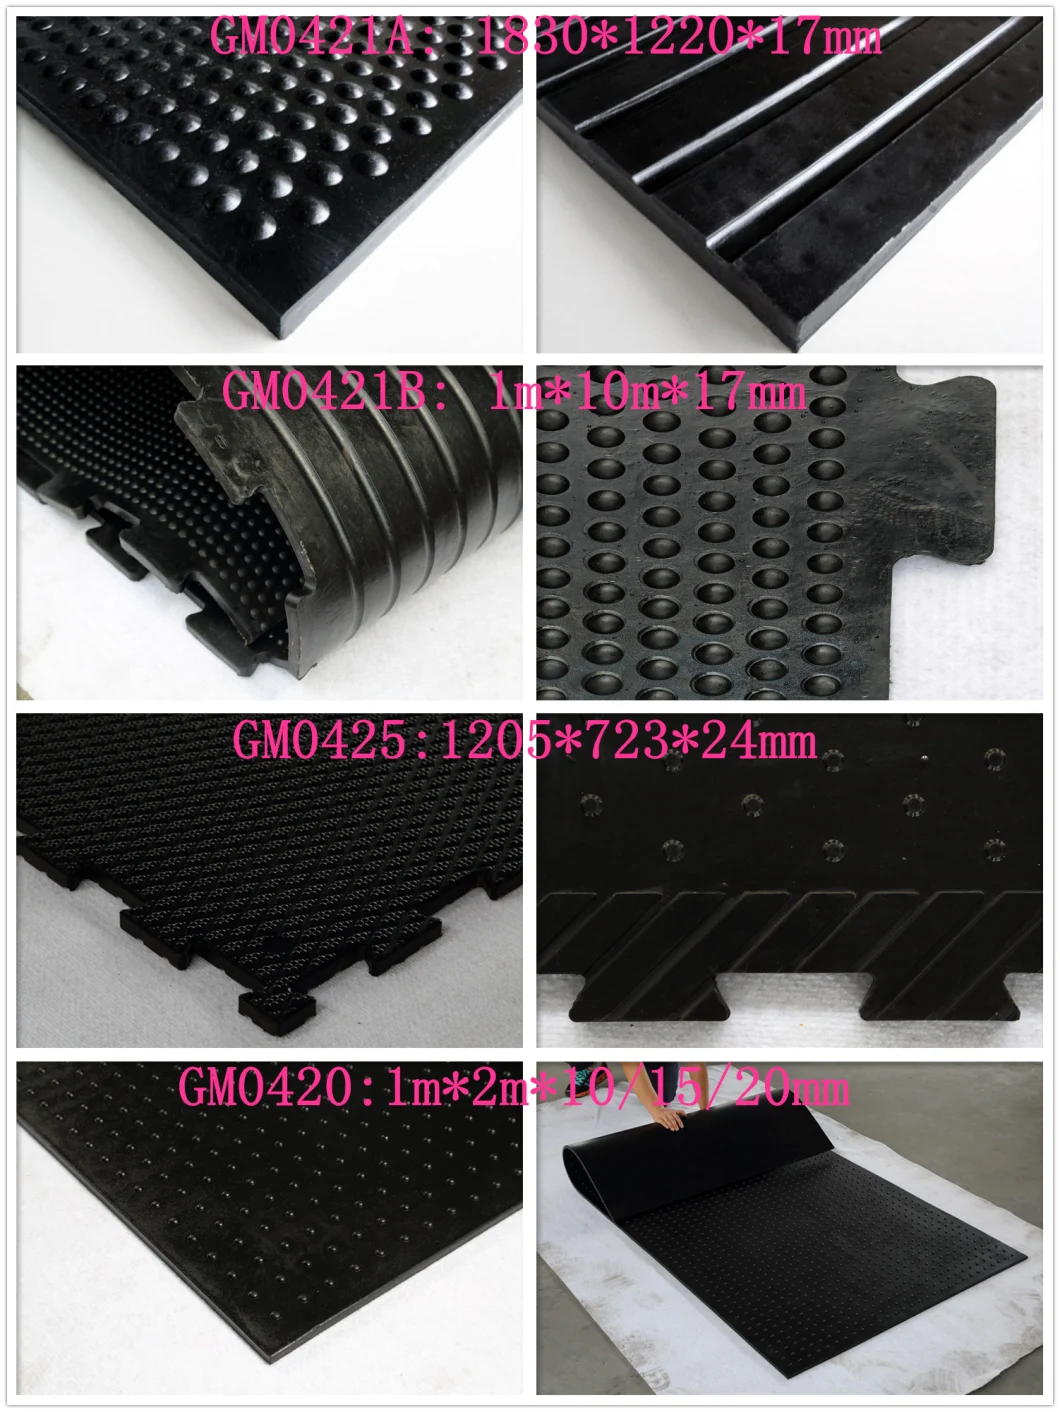 Rolled Alley Mats / 100% High Quality Non Porous Rubber Stall Mat